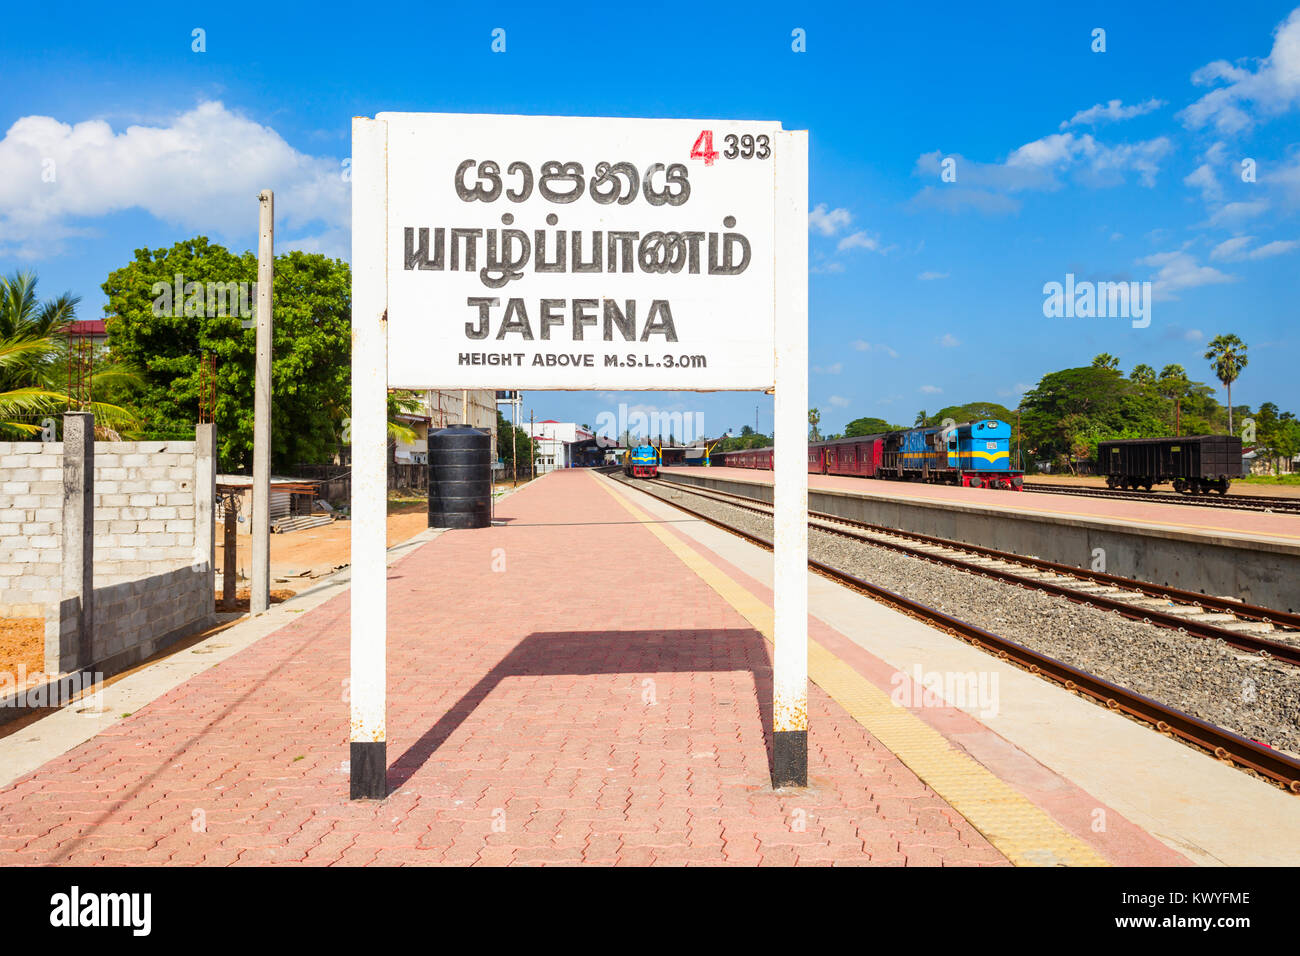 Jaffna railway station is a railway station in Jaffna, northern Sri Lanka. Jaffna railway station is one of the busiest in the country. Stock Photo